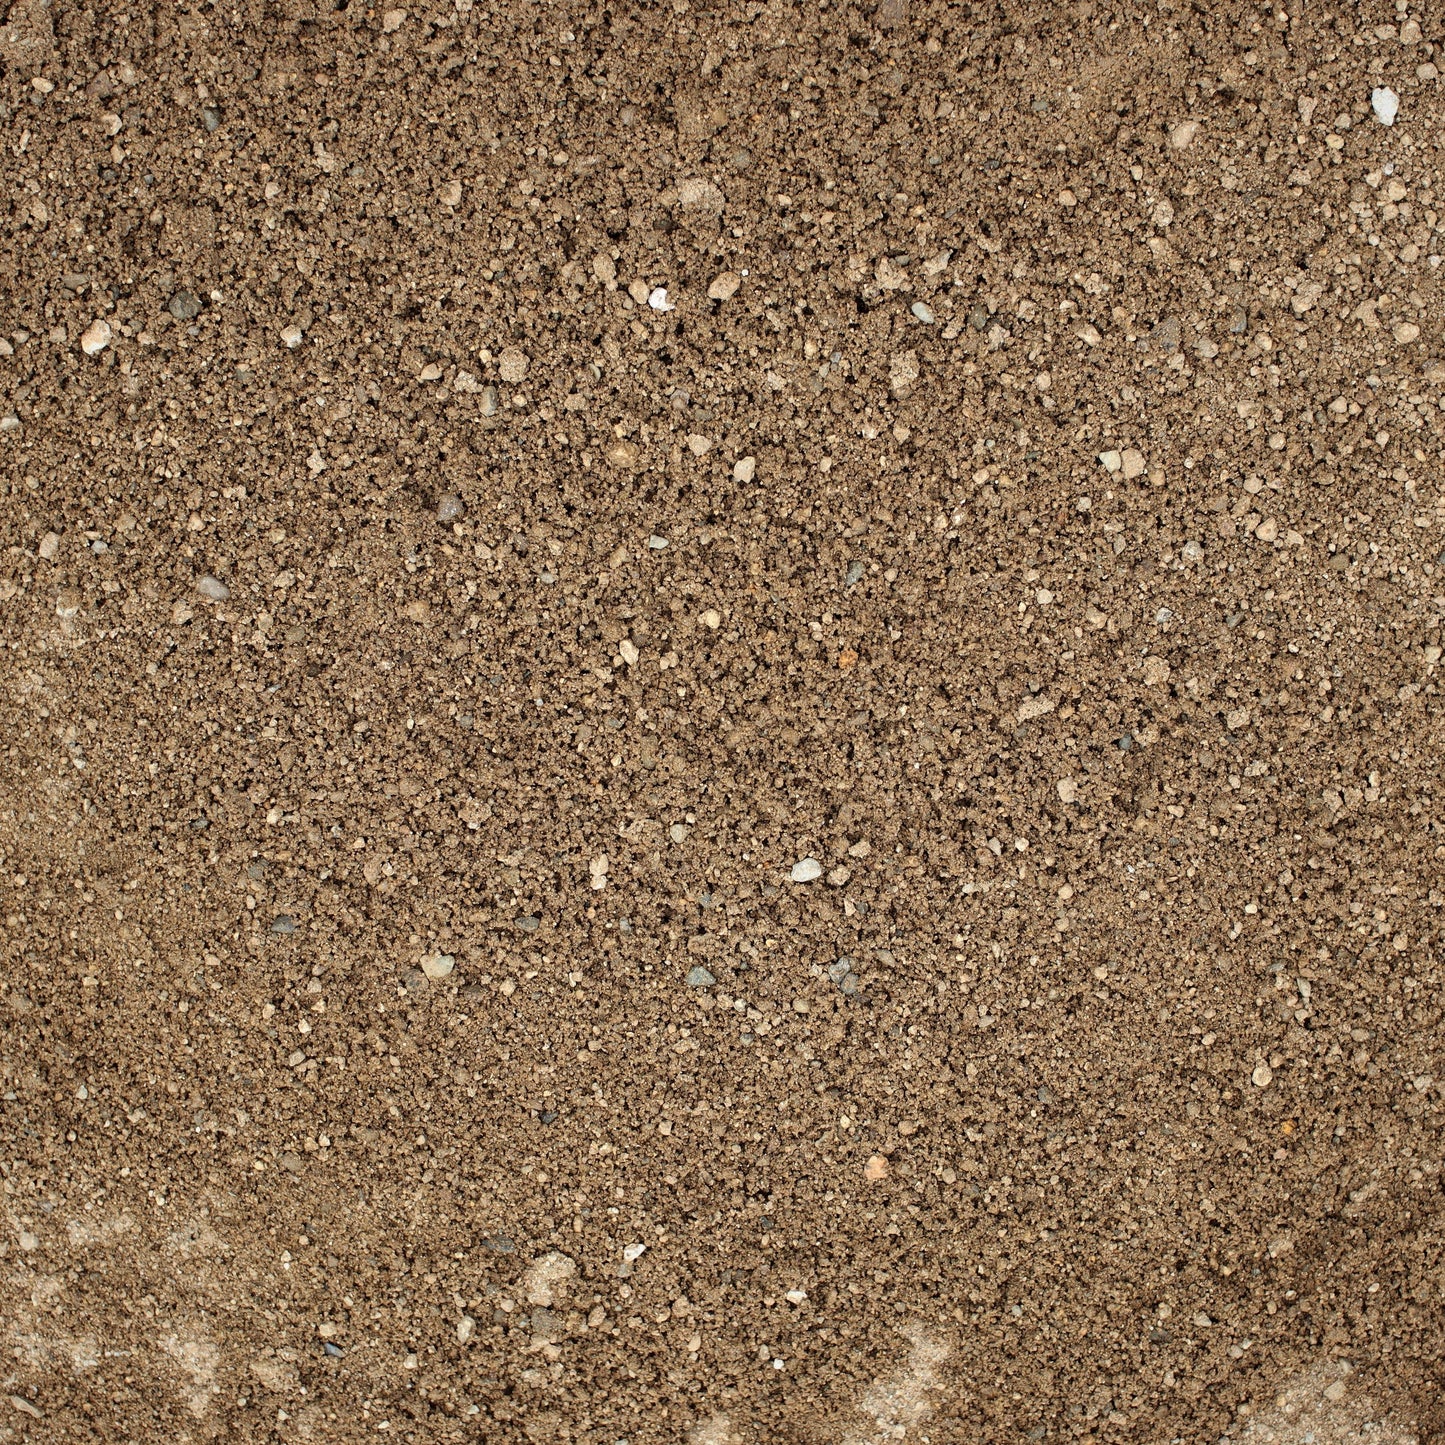 Overhead view of Arena Sand gravel from Missoula Dirt Delivery